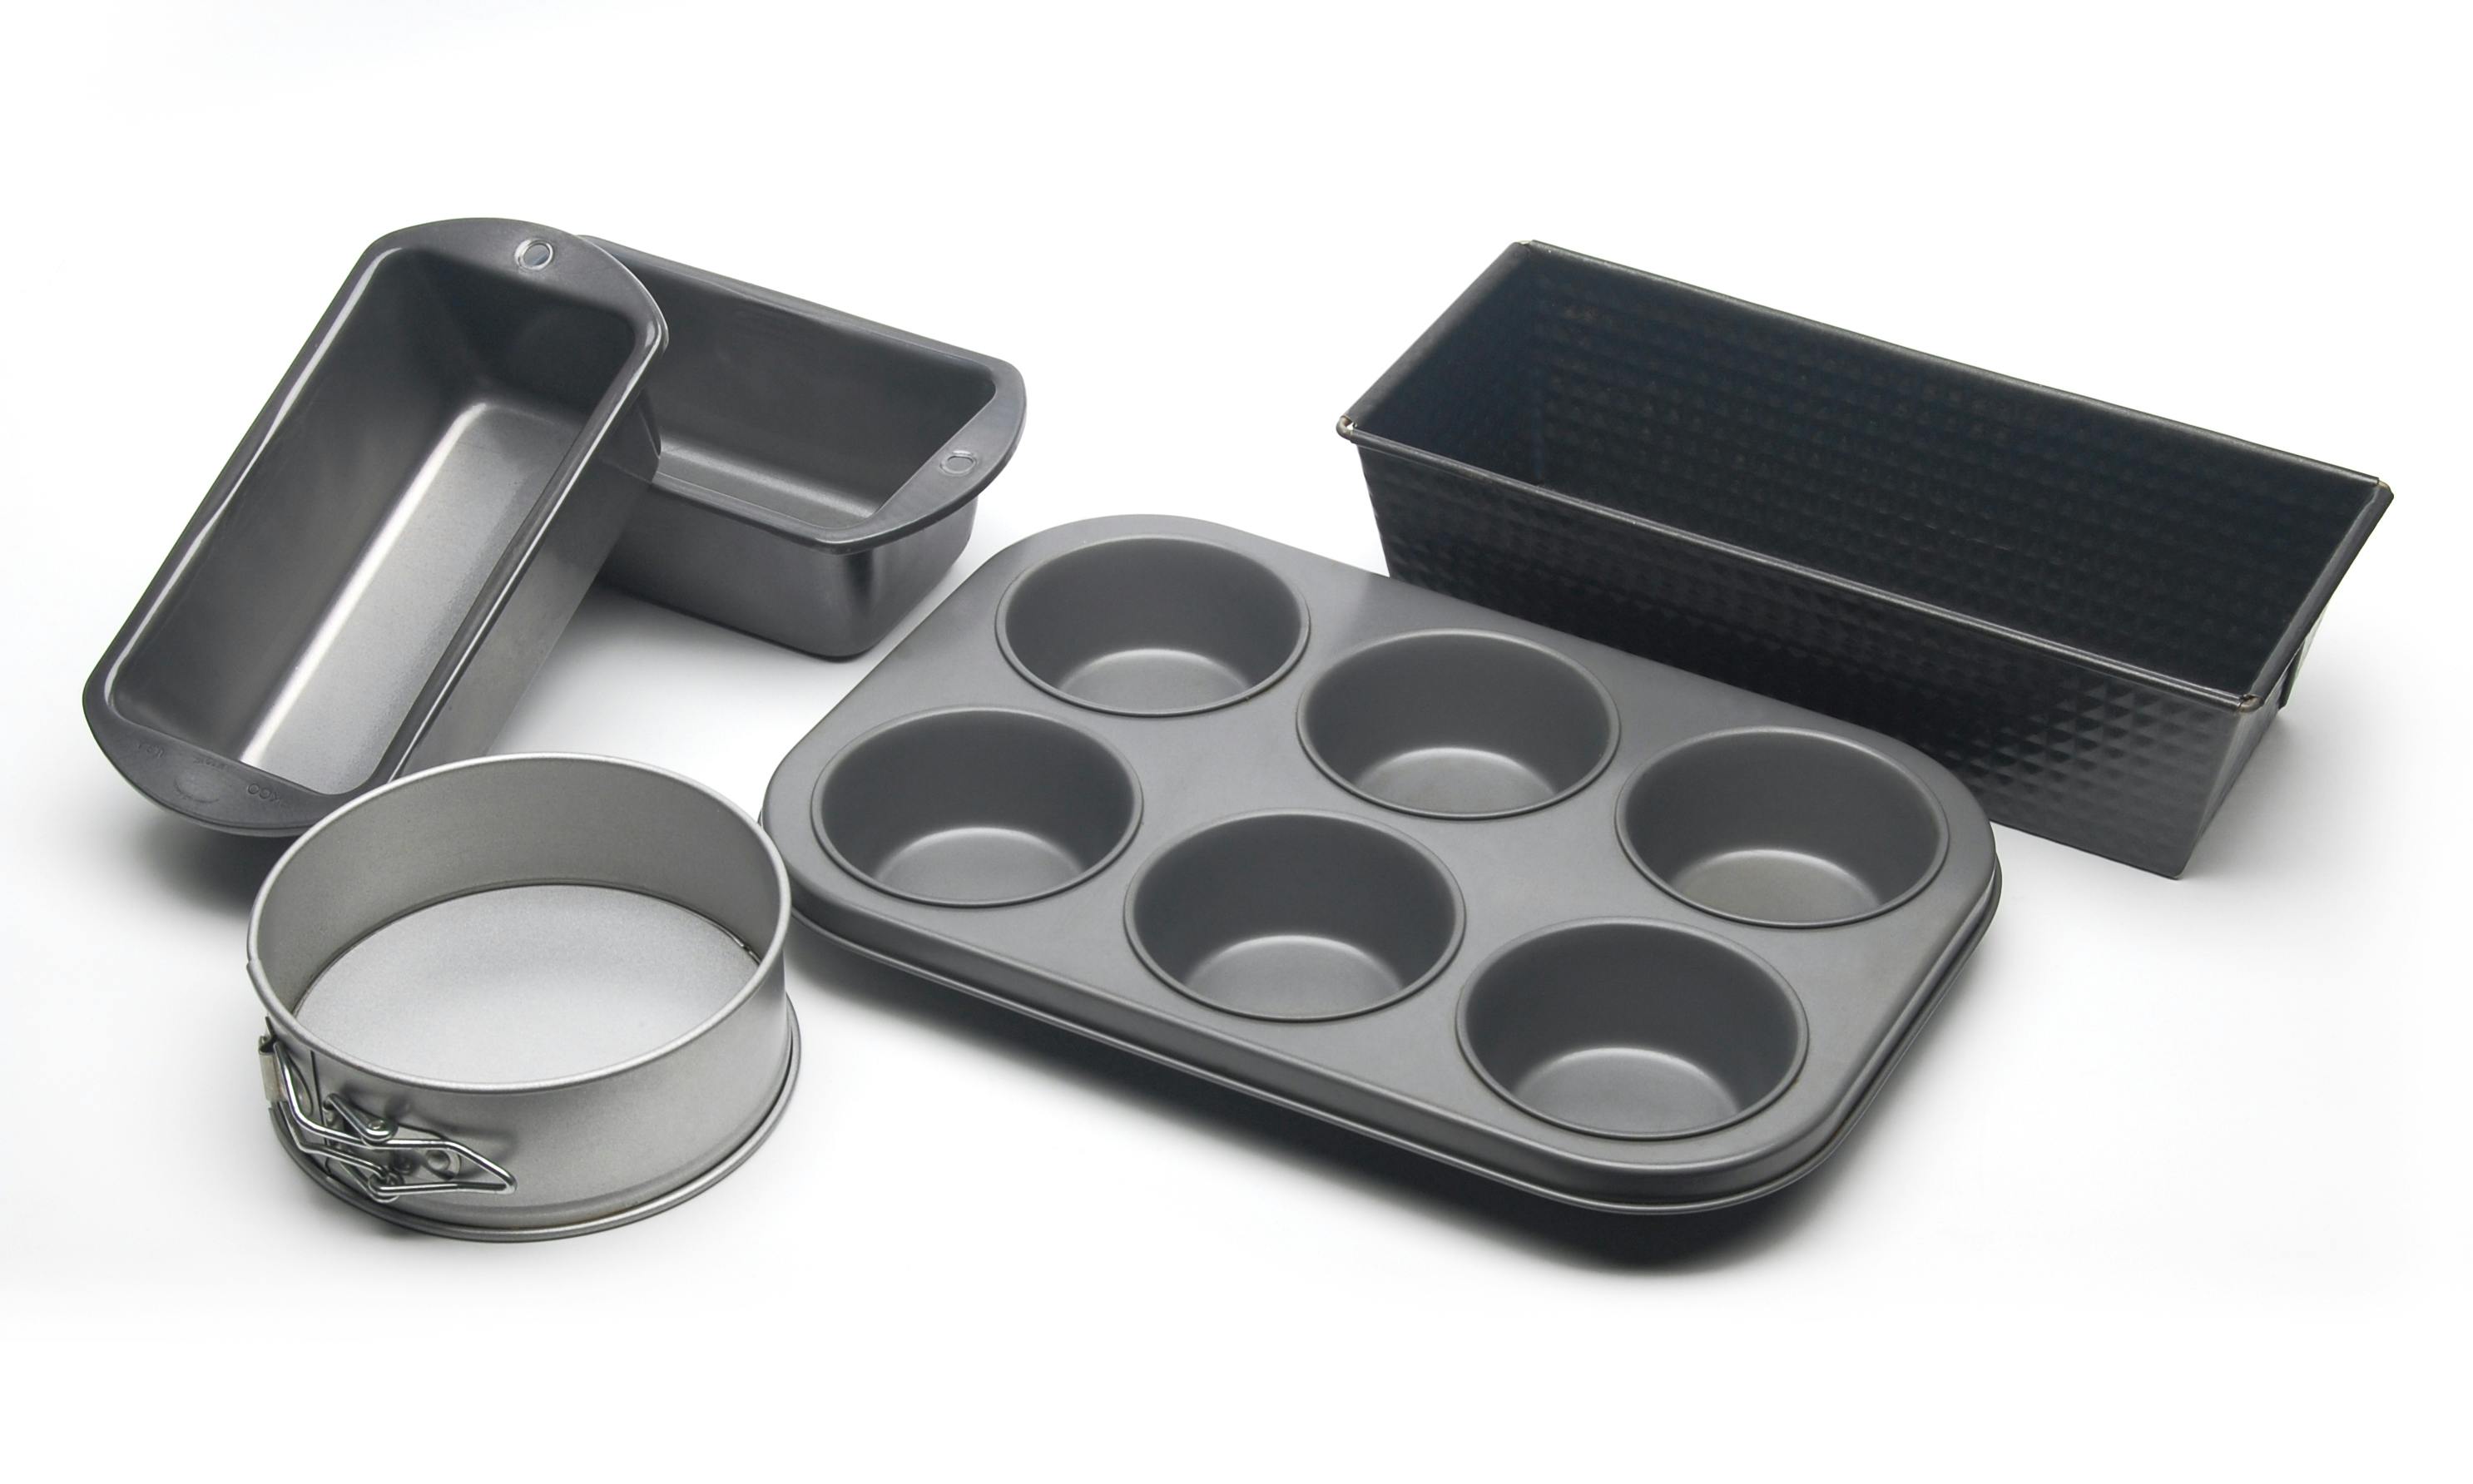 The Best Non-Toxic Muffin Pan to Eliminate Toxins